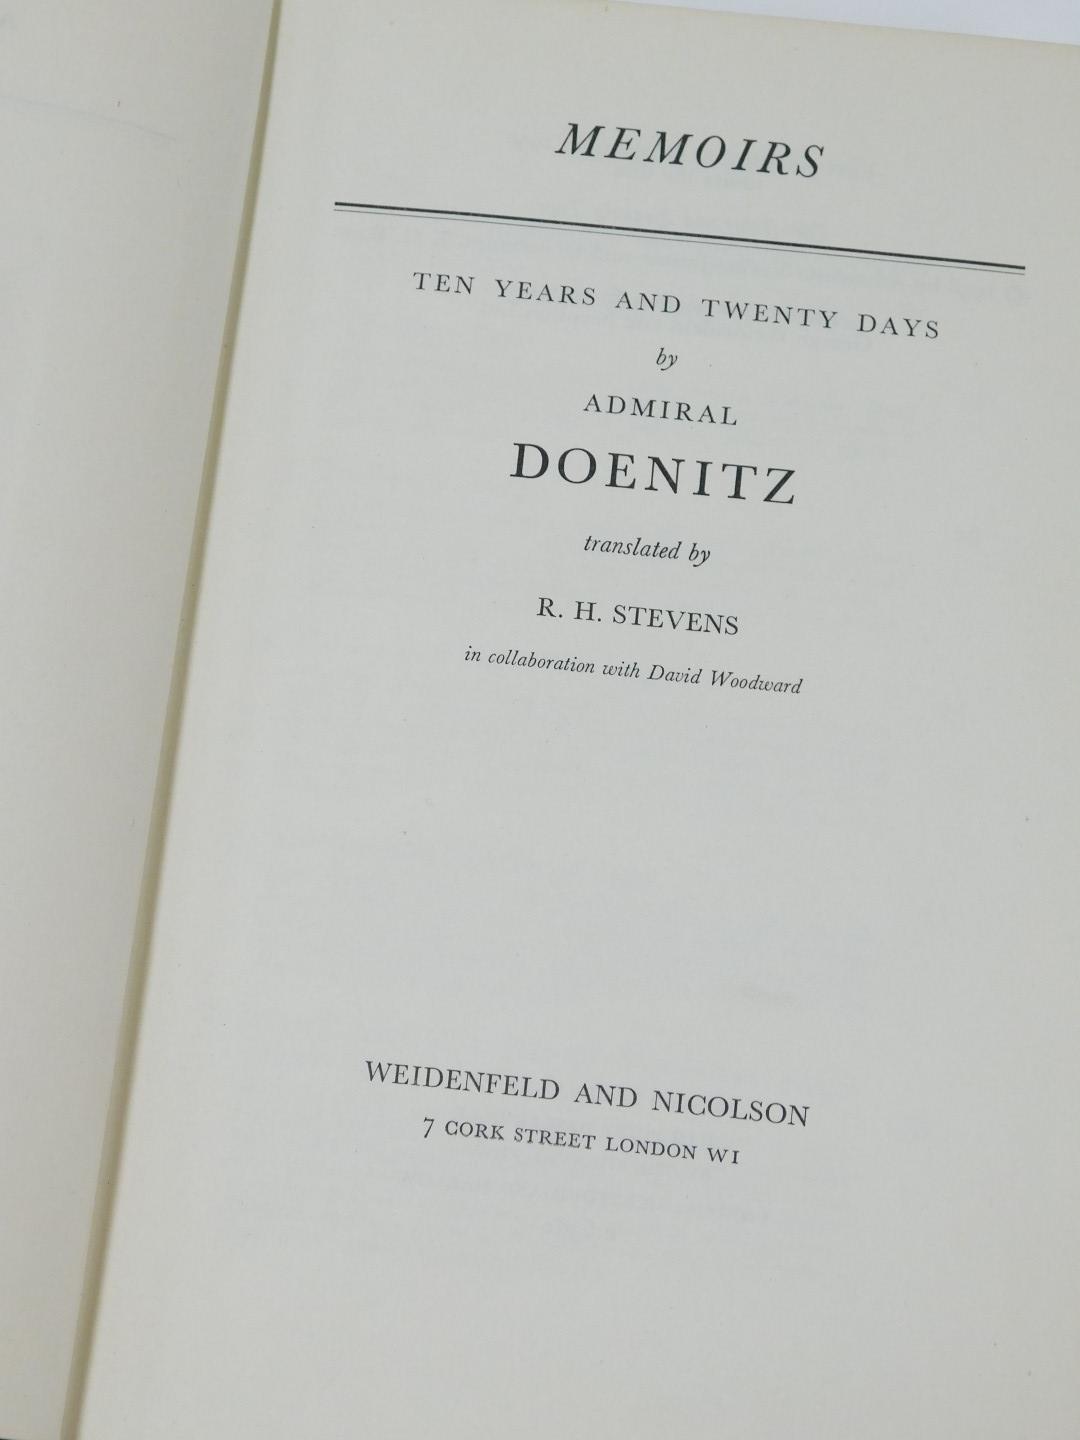 Doenitz (Admiral Karl). Memoirs, Ten Years and Twenty Days, translated by R H Stevens, autographed c - Image 3 of 4